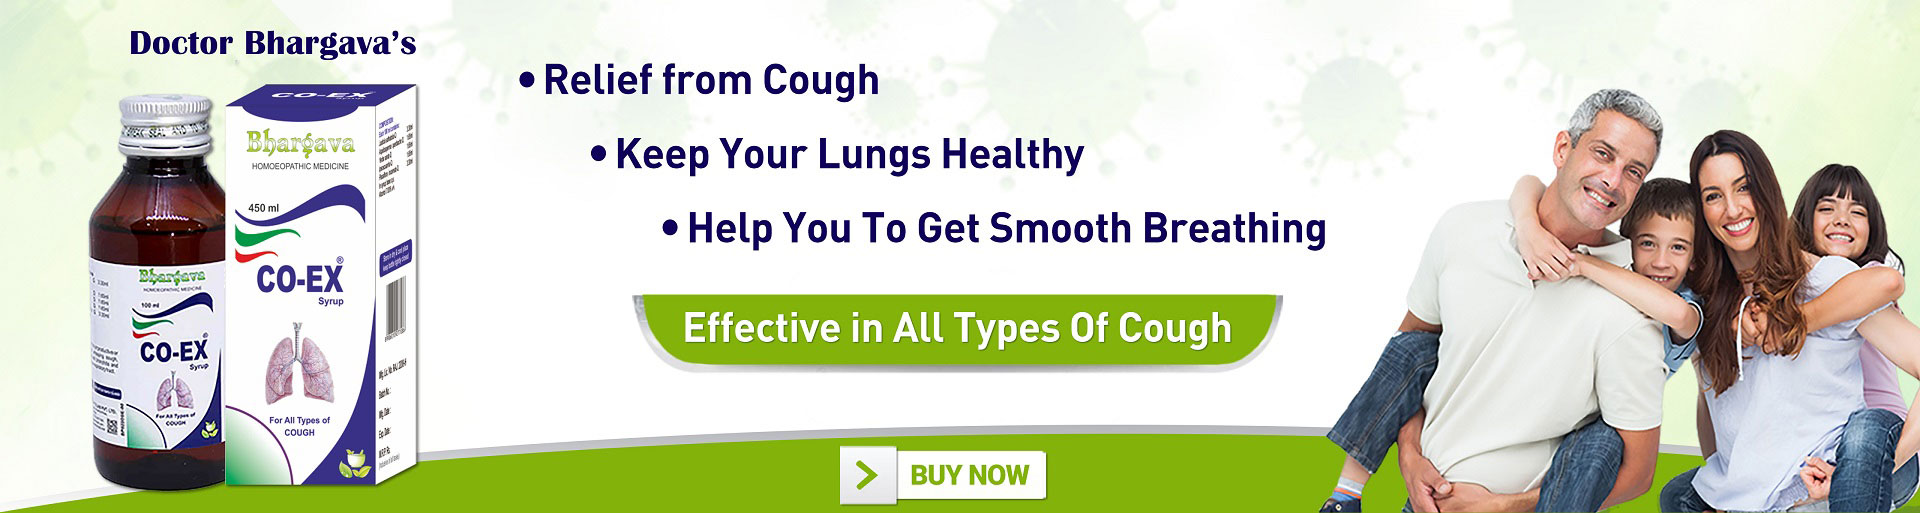 Co-ex syrup for Dry & Wet Cough
